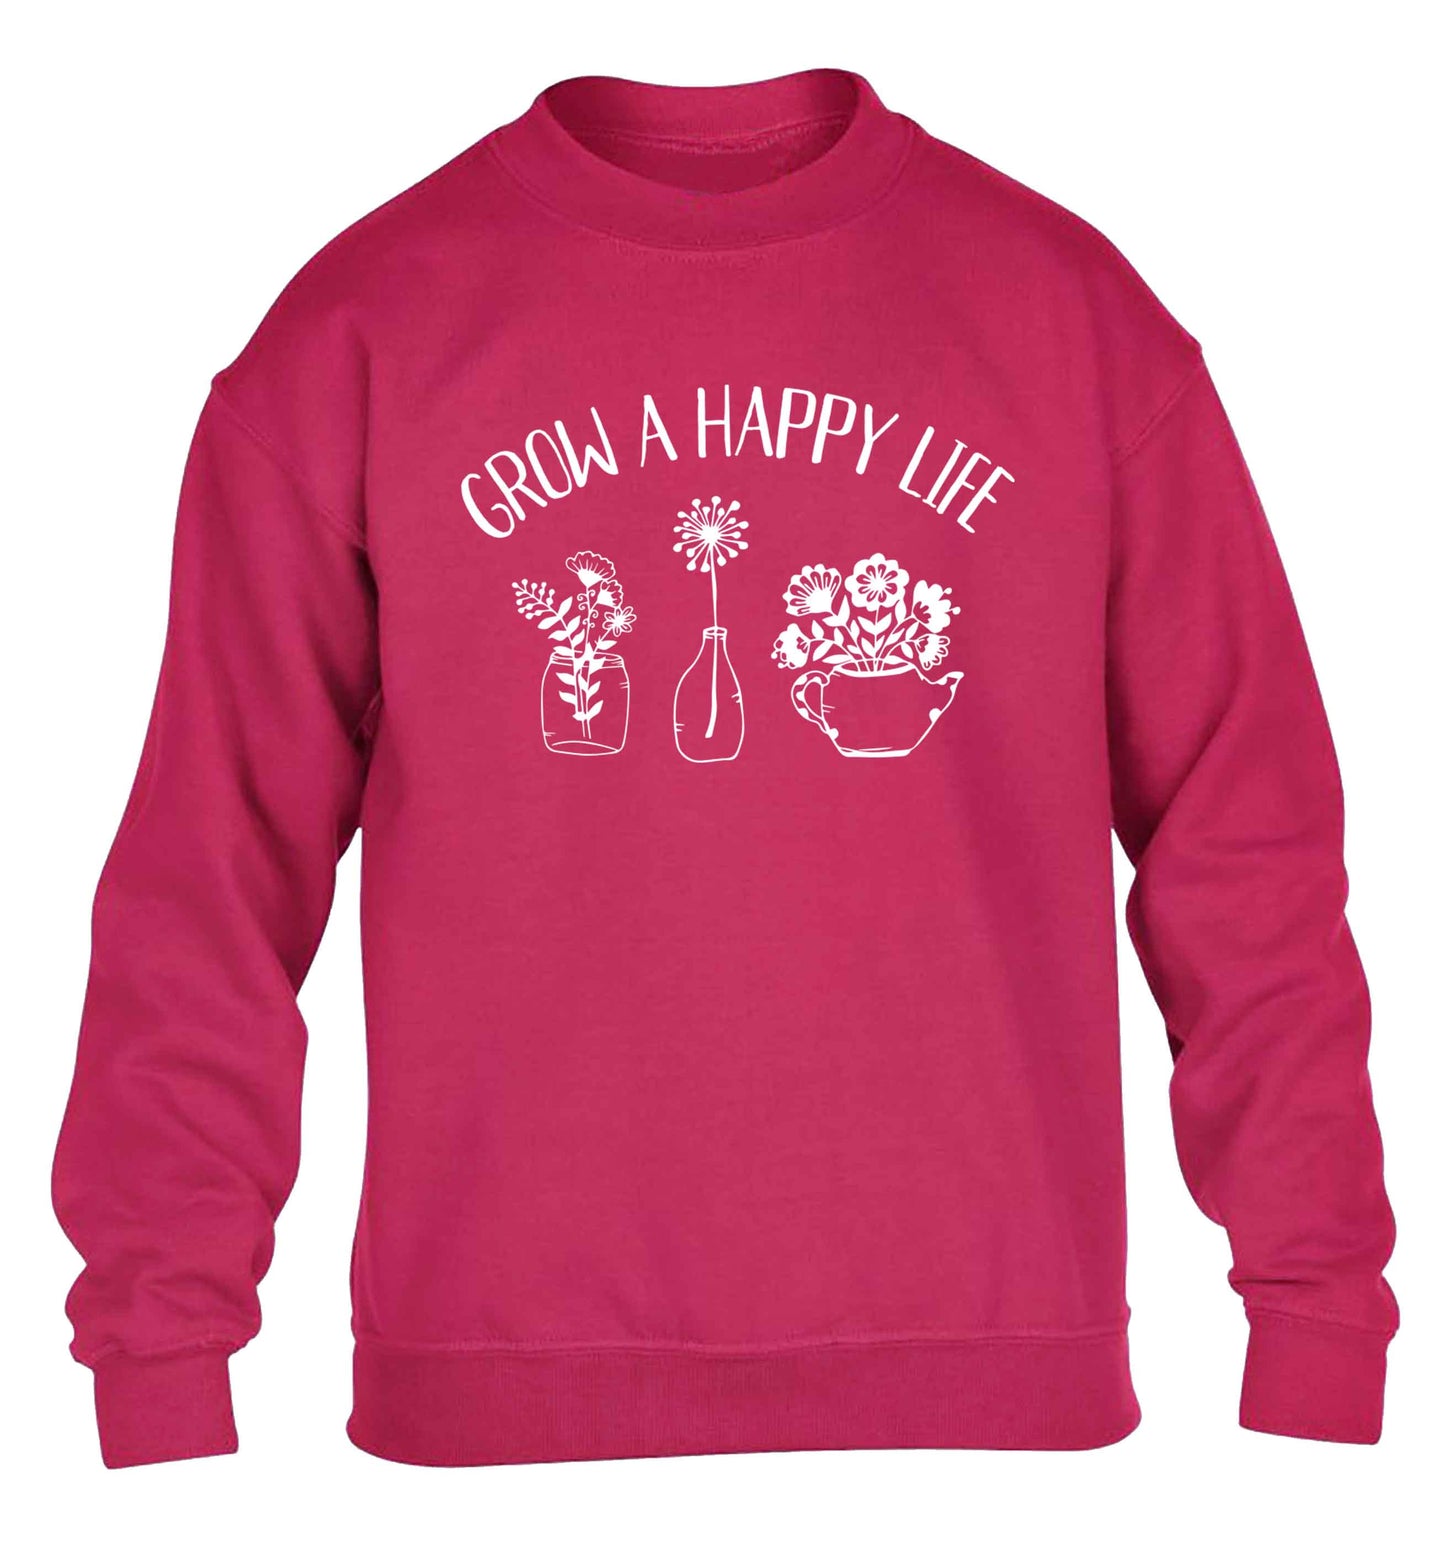 Grow a happy life children's pink sweater 12-13 Years